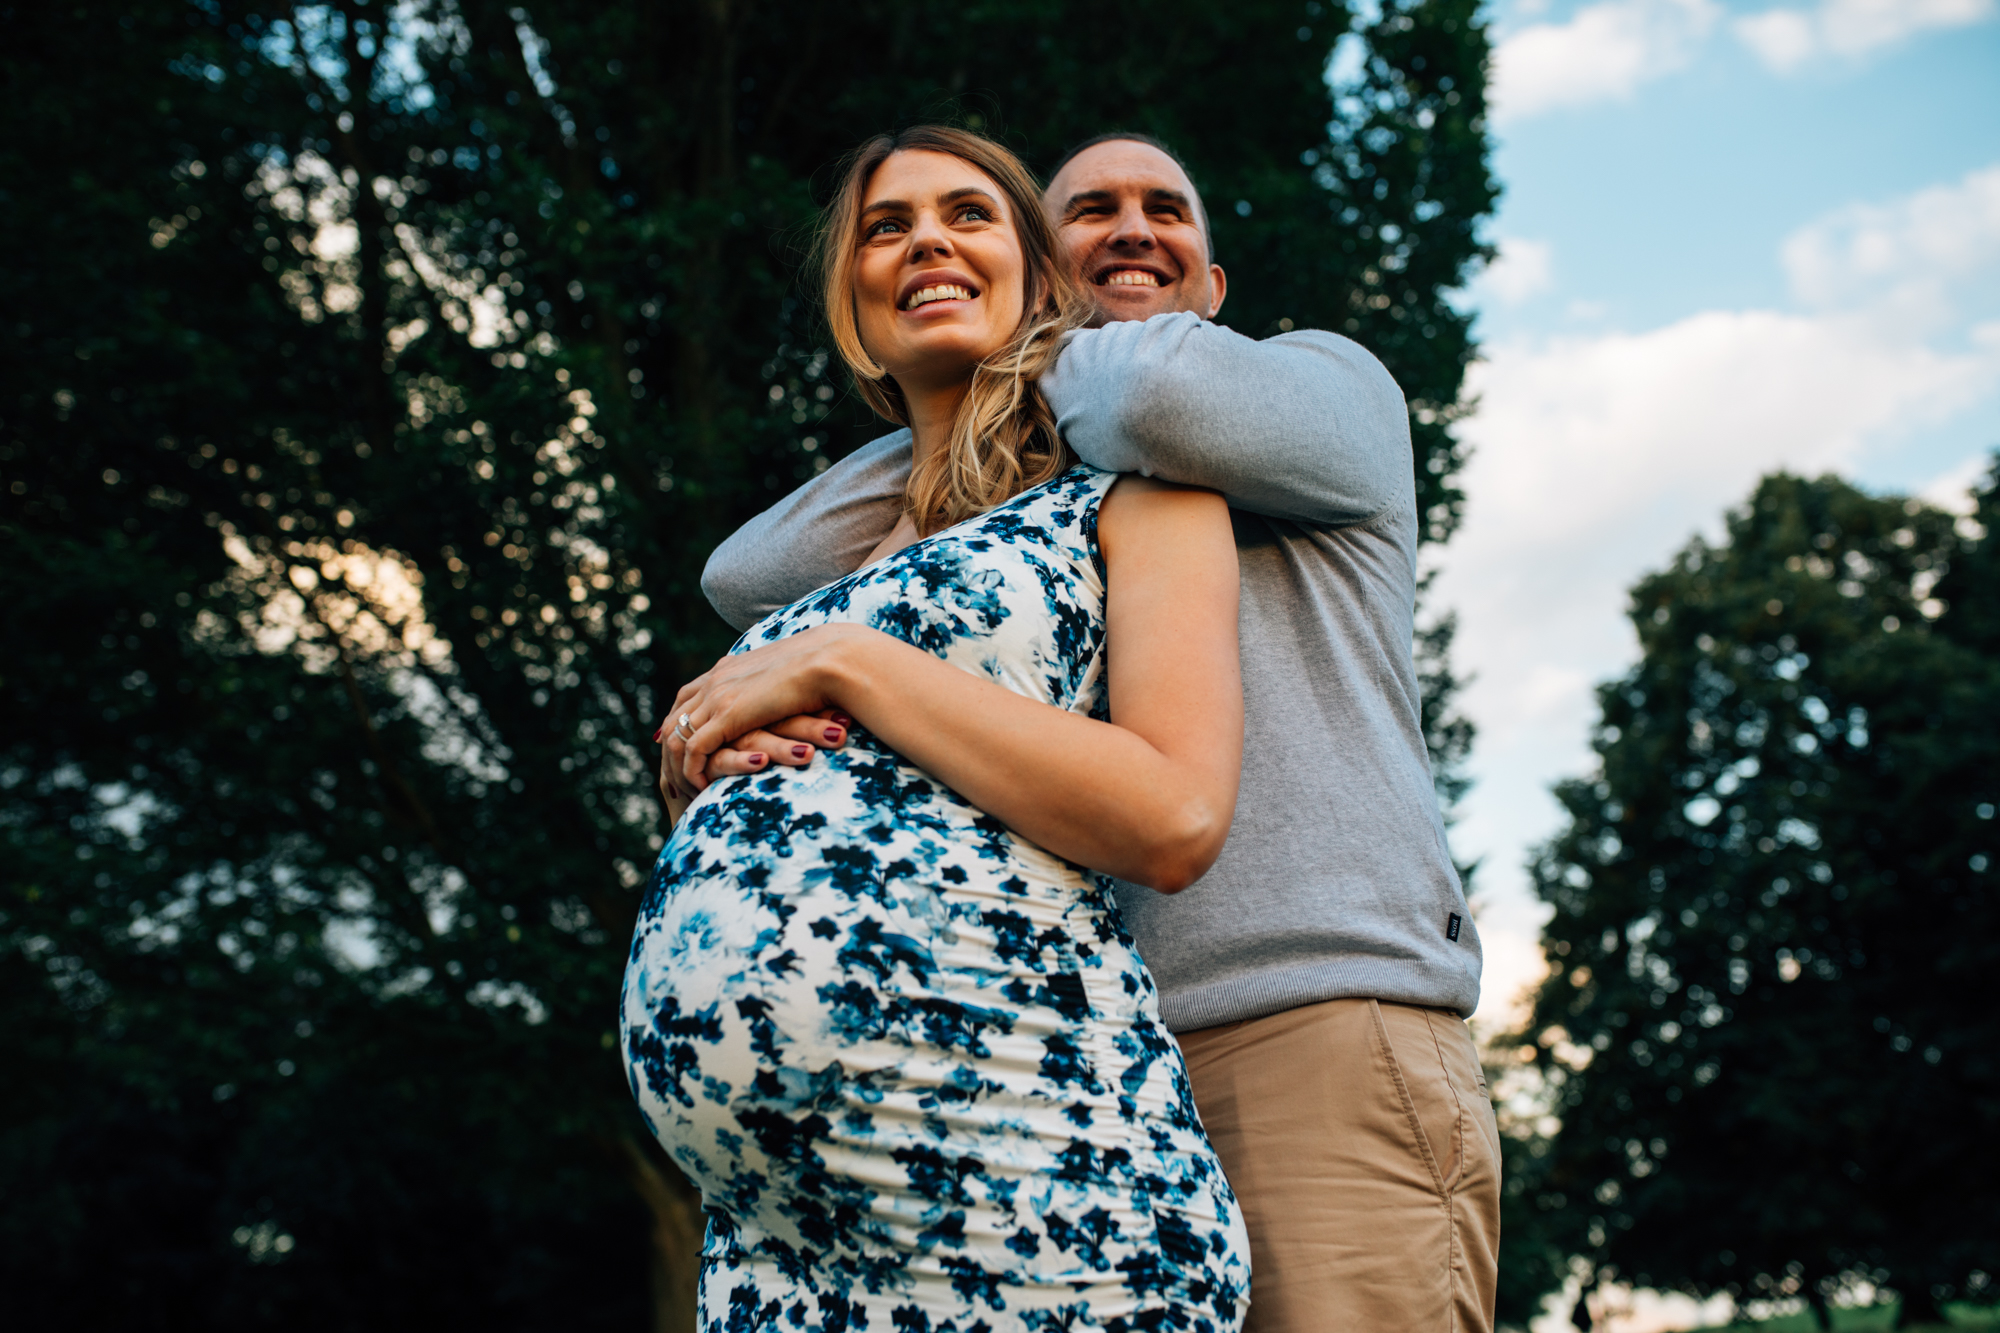 Maternity photography in Primrose Hill, London